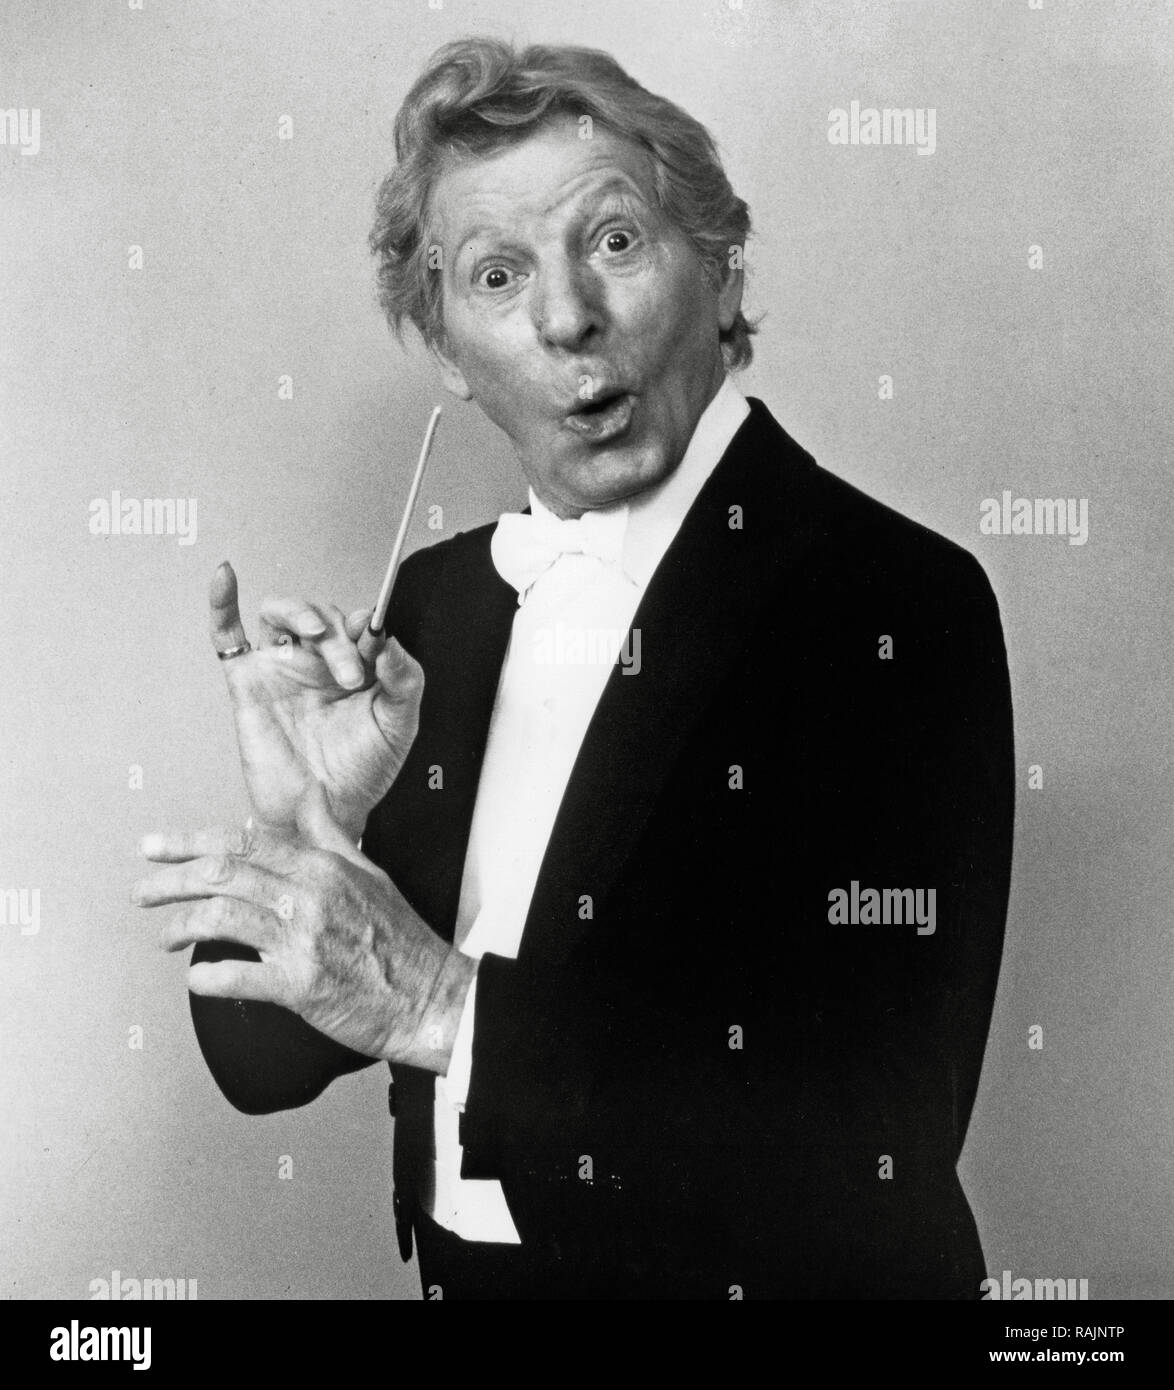 Publicity photo of Danny Kaye,  1981    File Reference # 33636 941THA Stock Photo